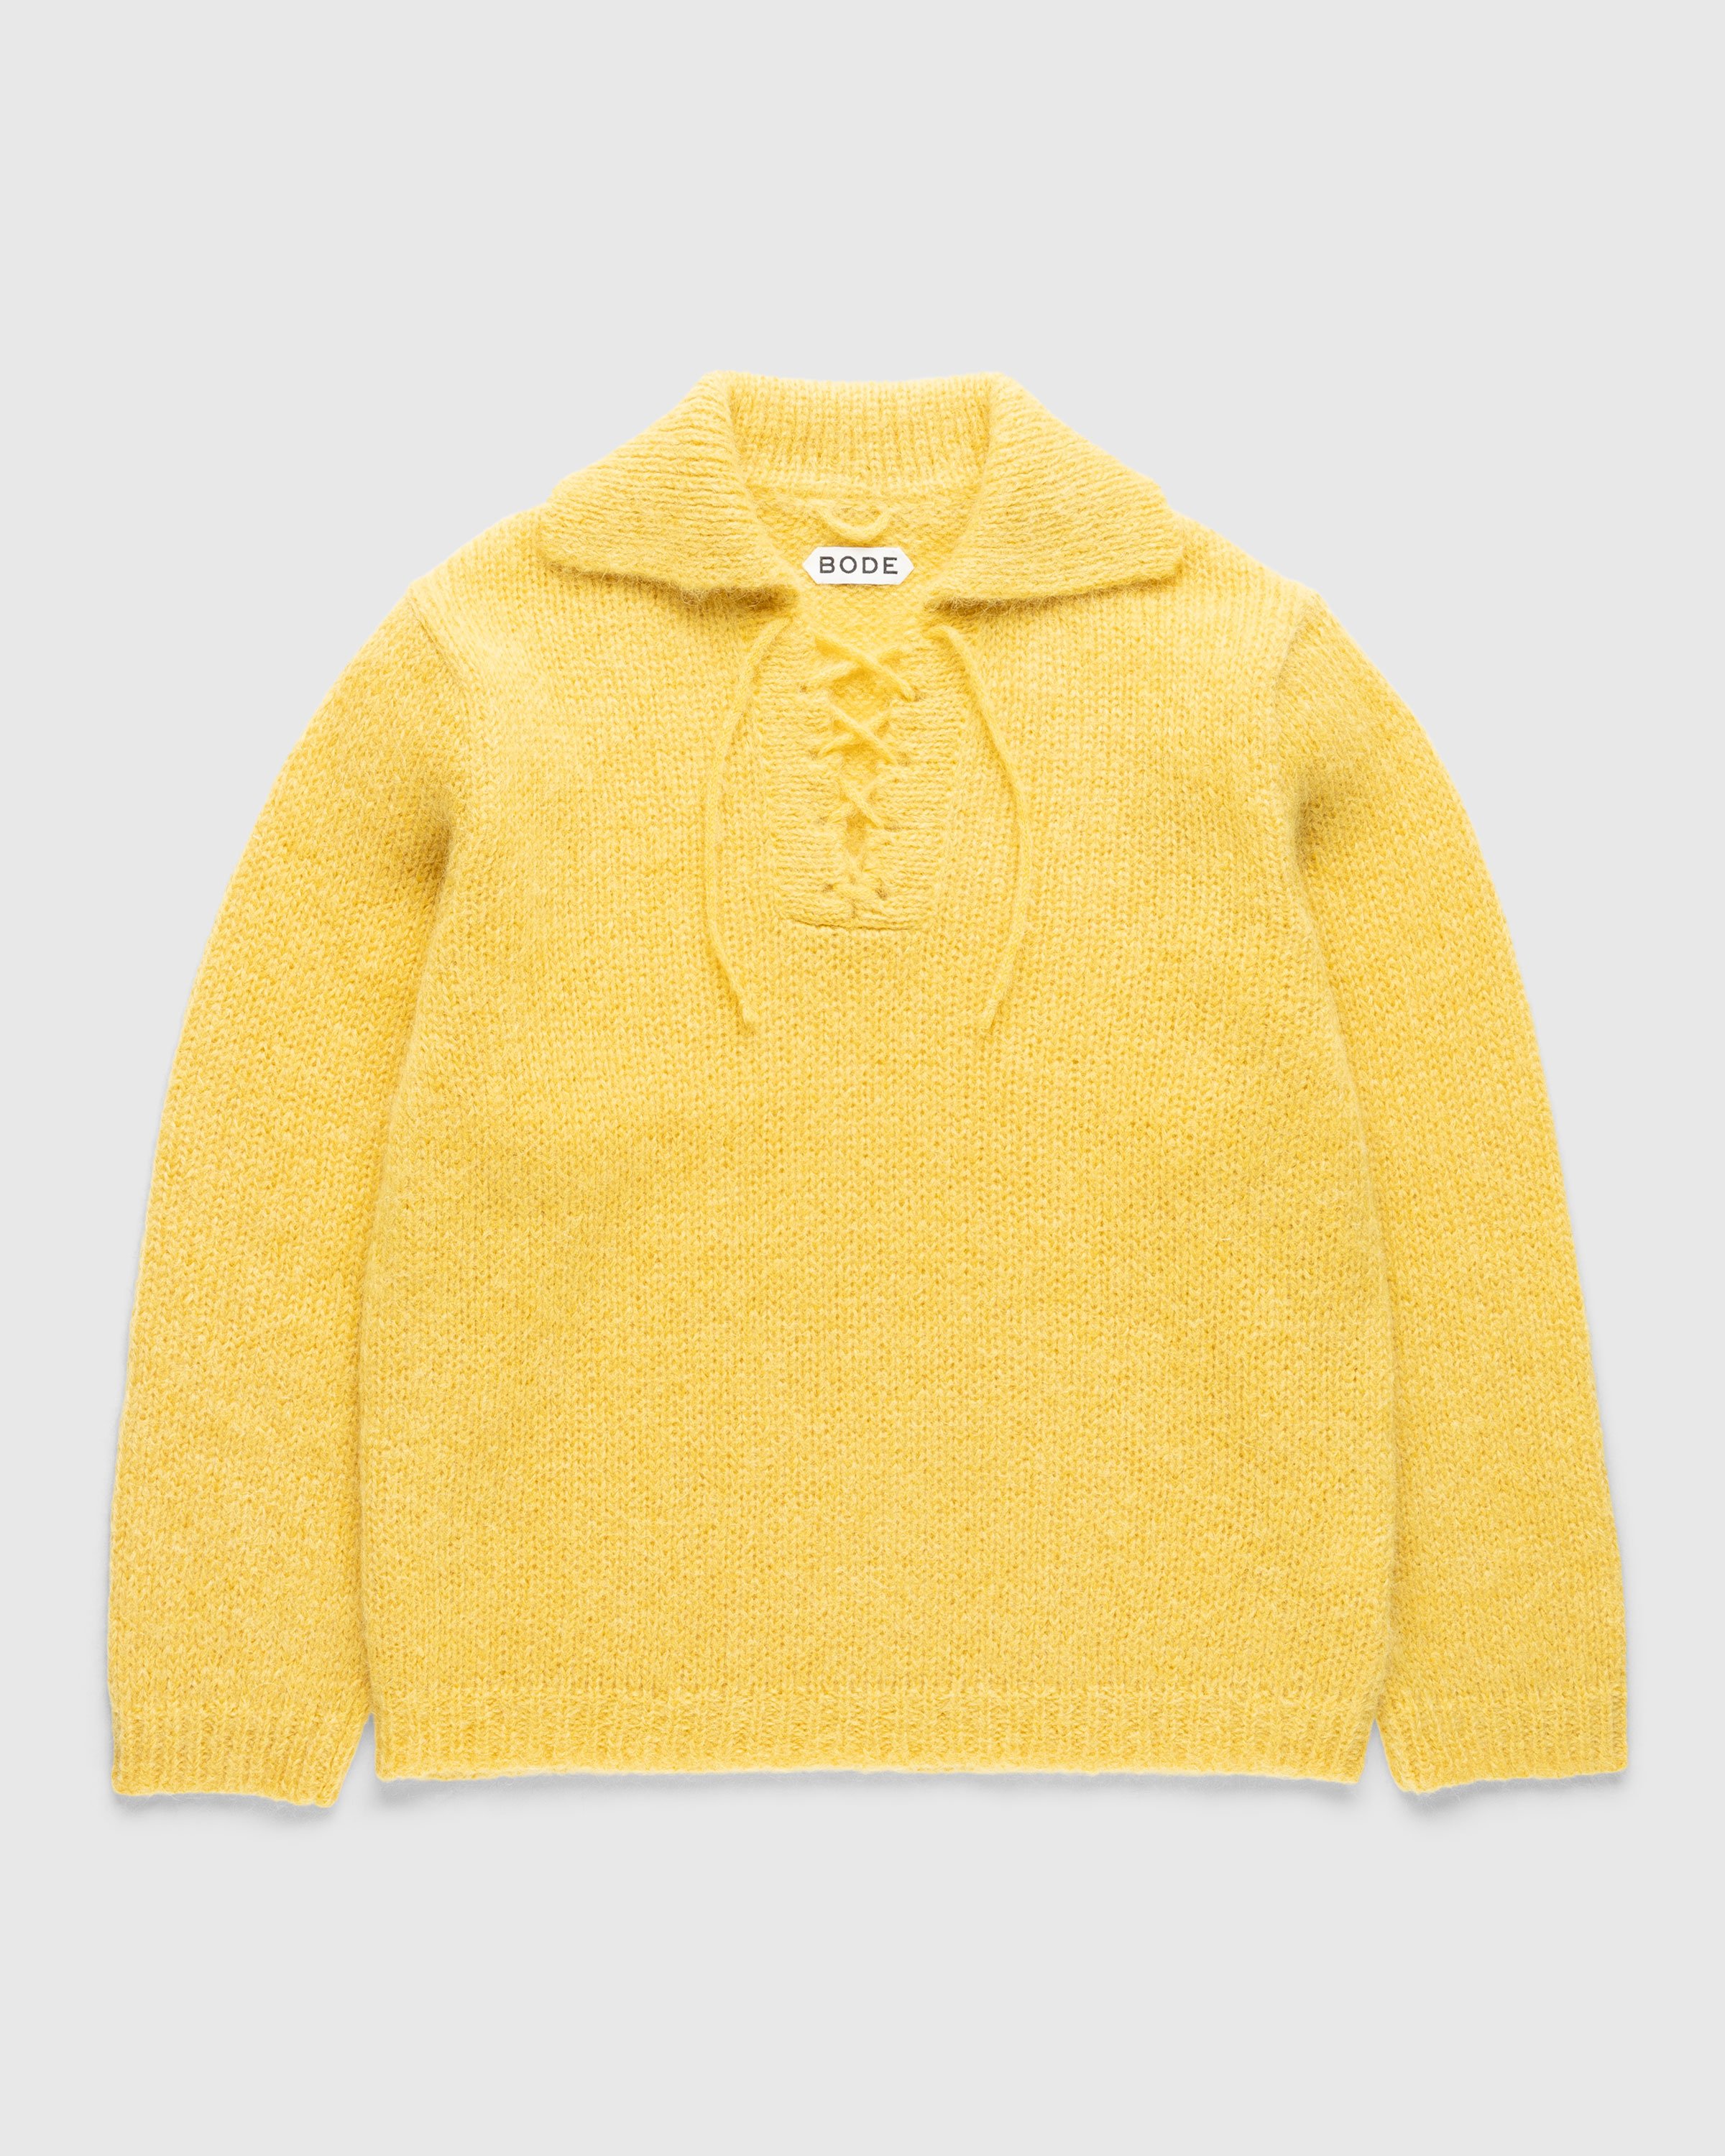 Bode - Alpine Pullover Yellow - Clothing - YELLOW - Image 1